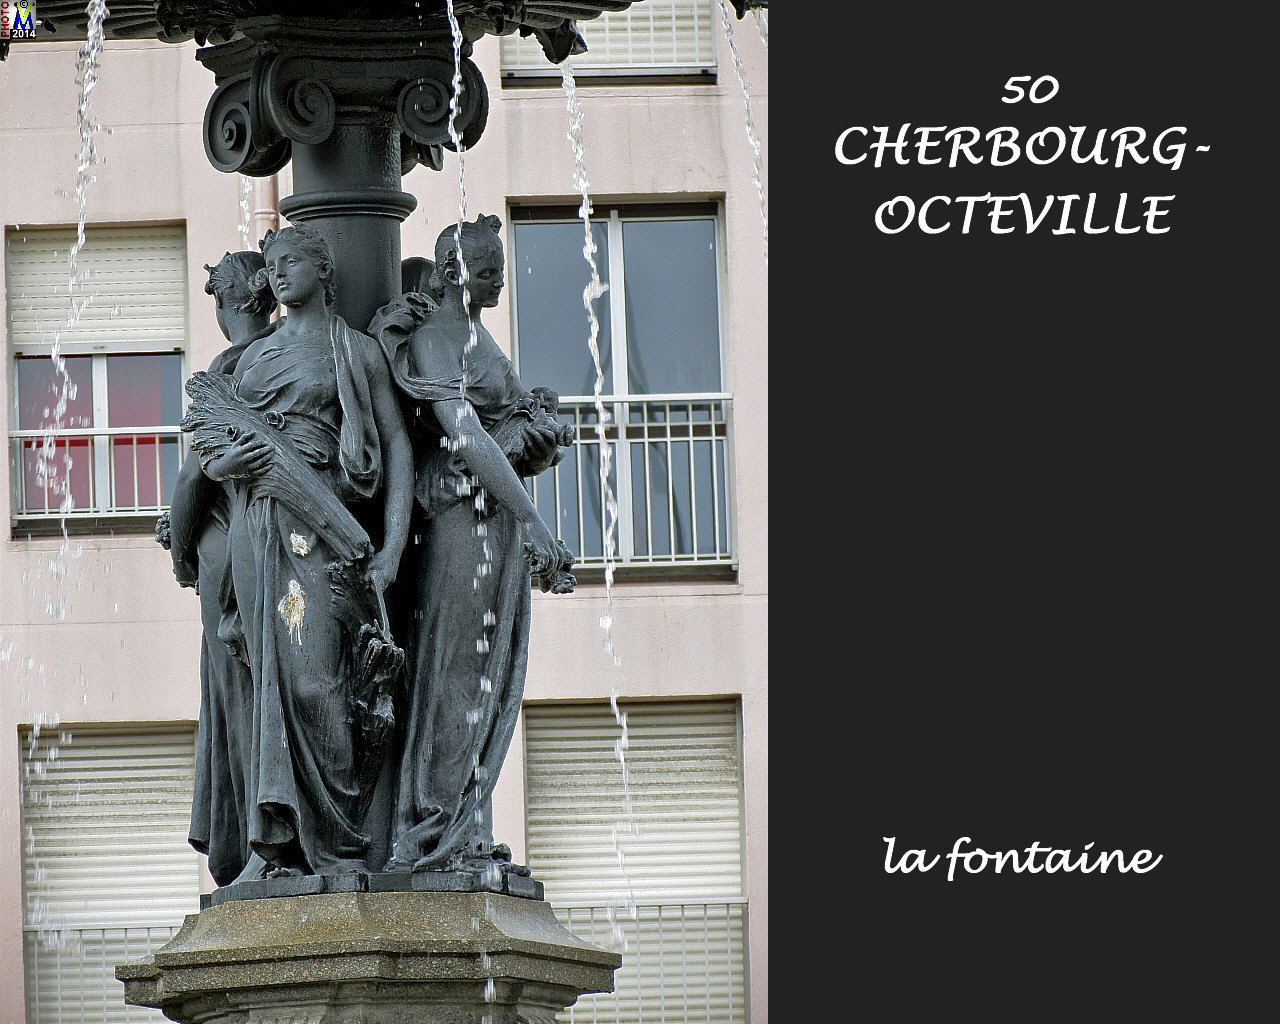 50CHERBOURG_fontaine_102.jpg